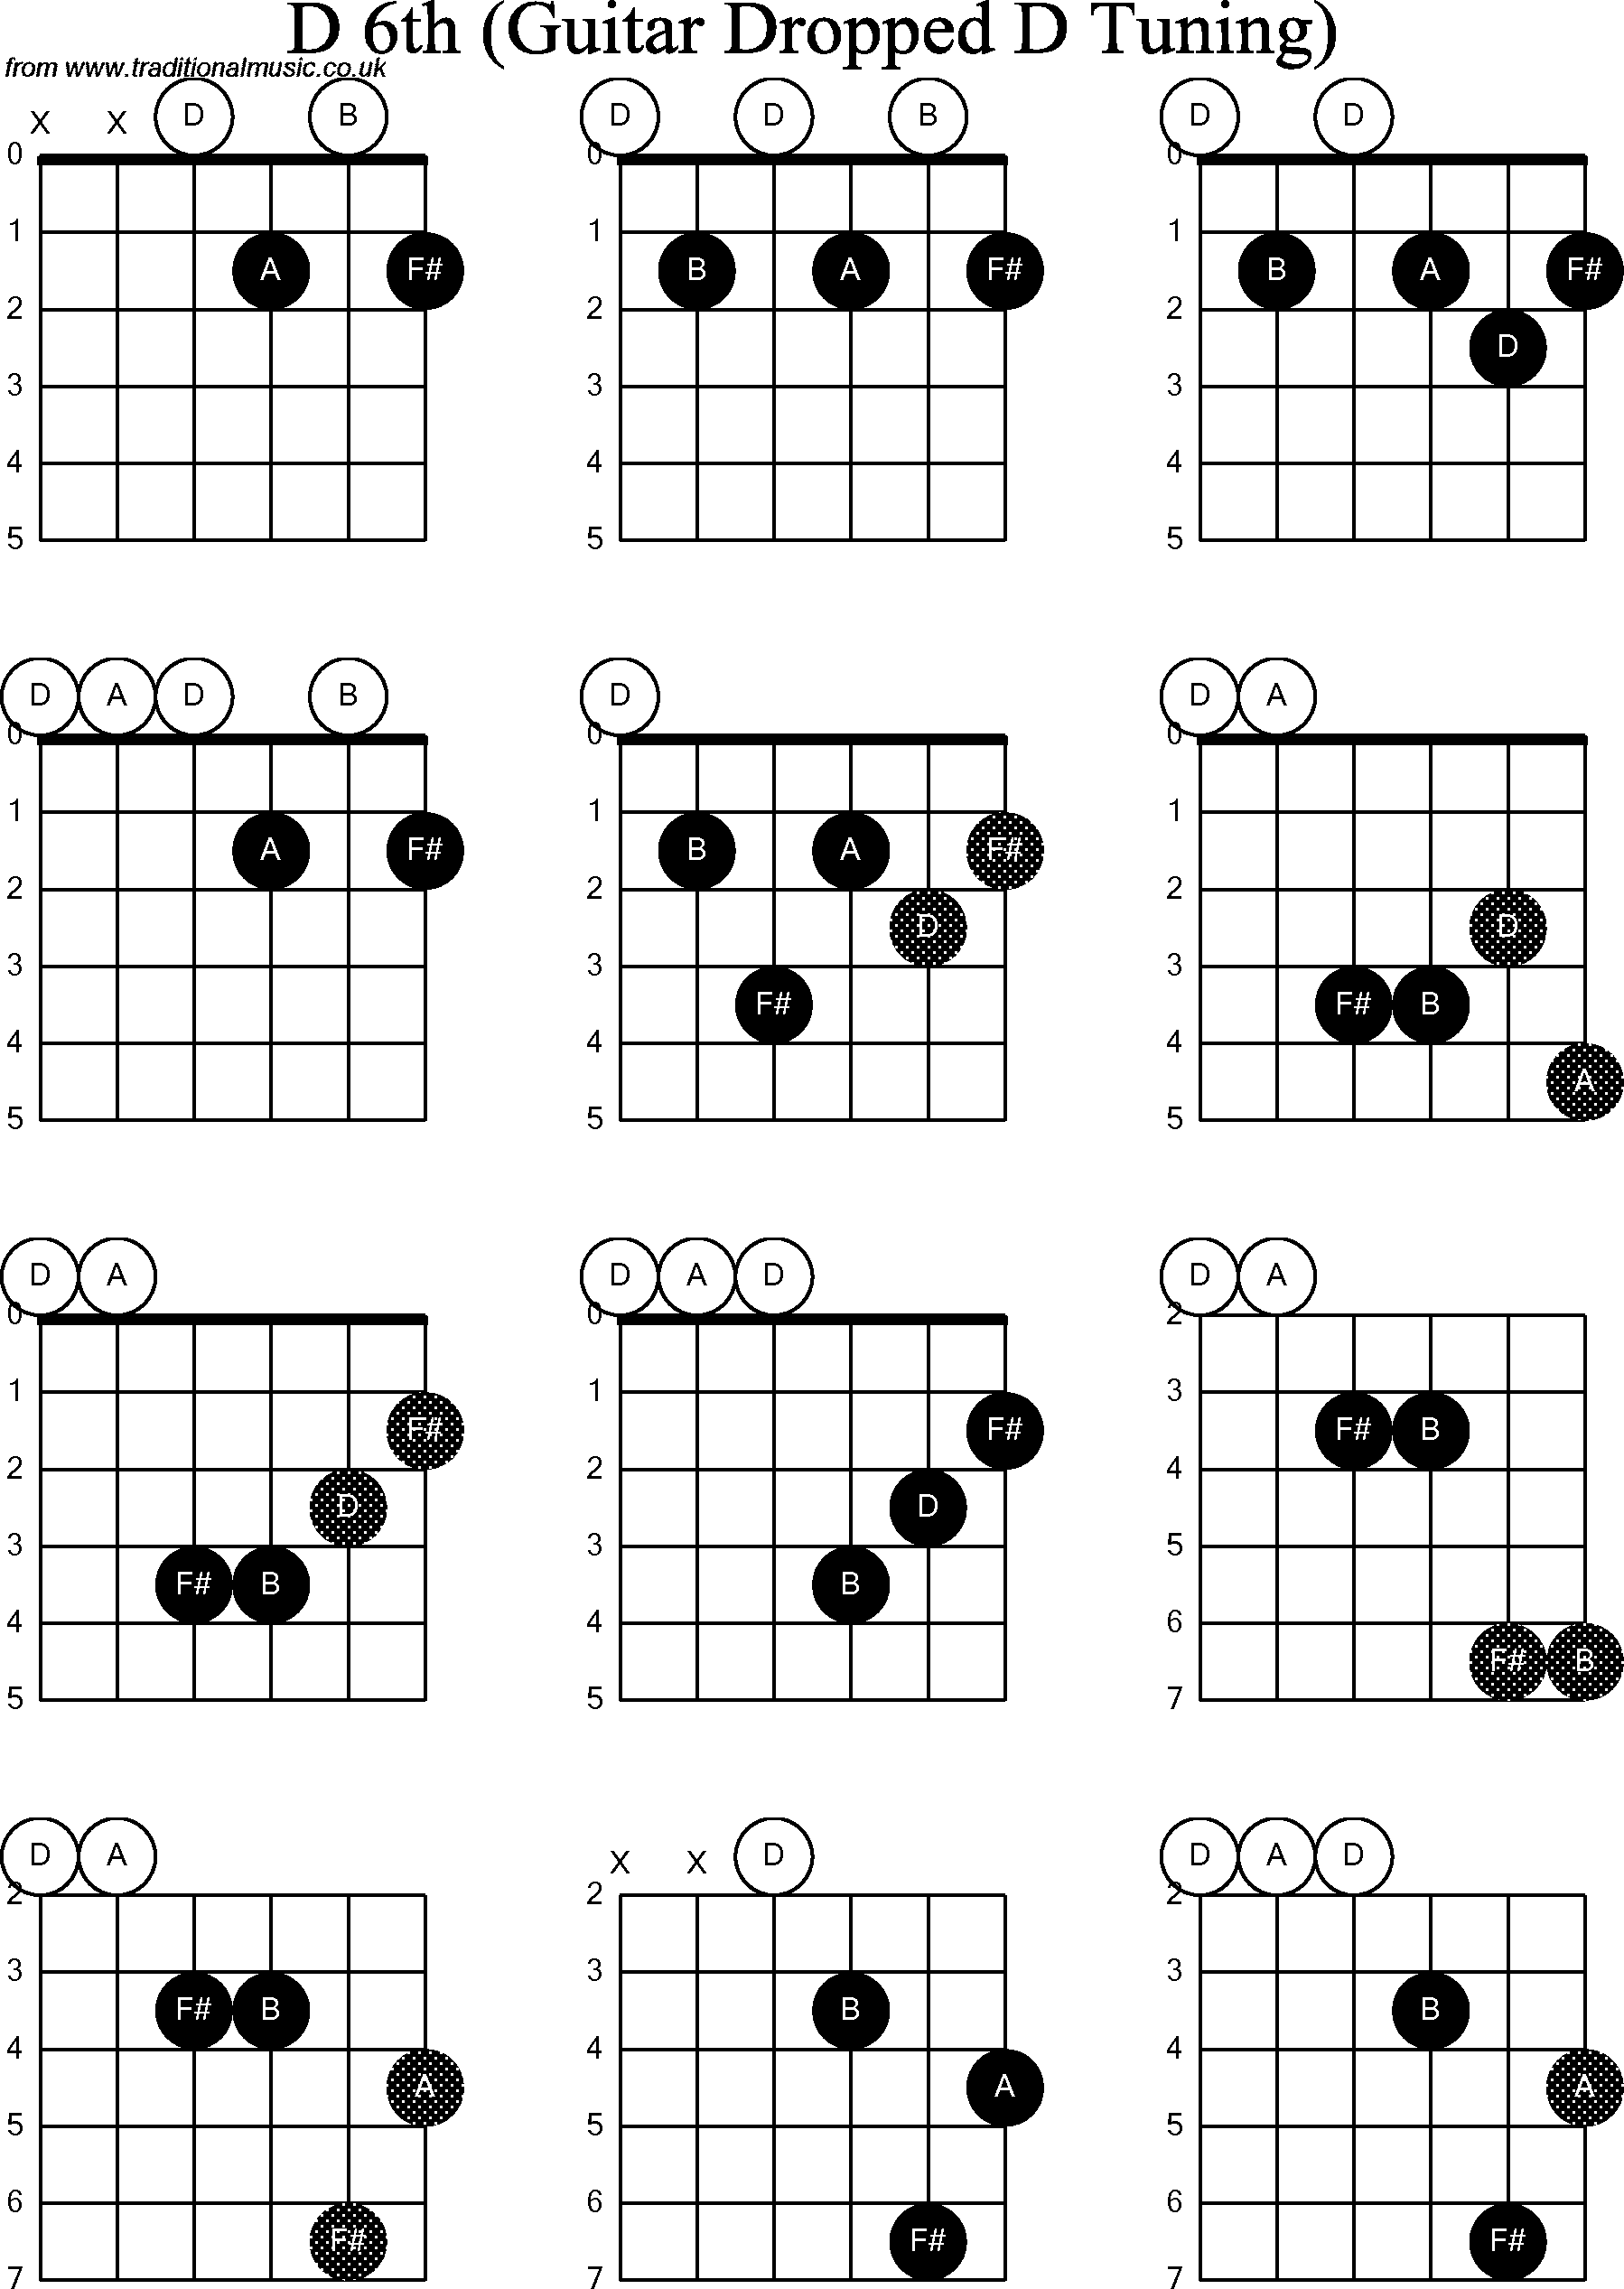 Chord diagrams for dropped D Guitar(DADGBE), D6th